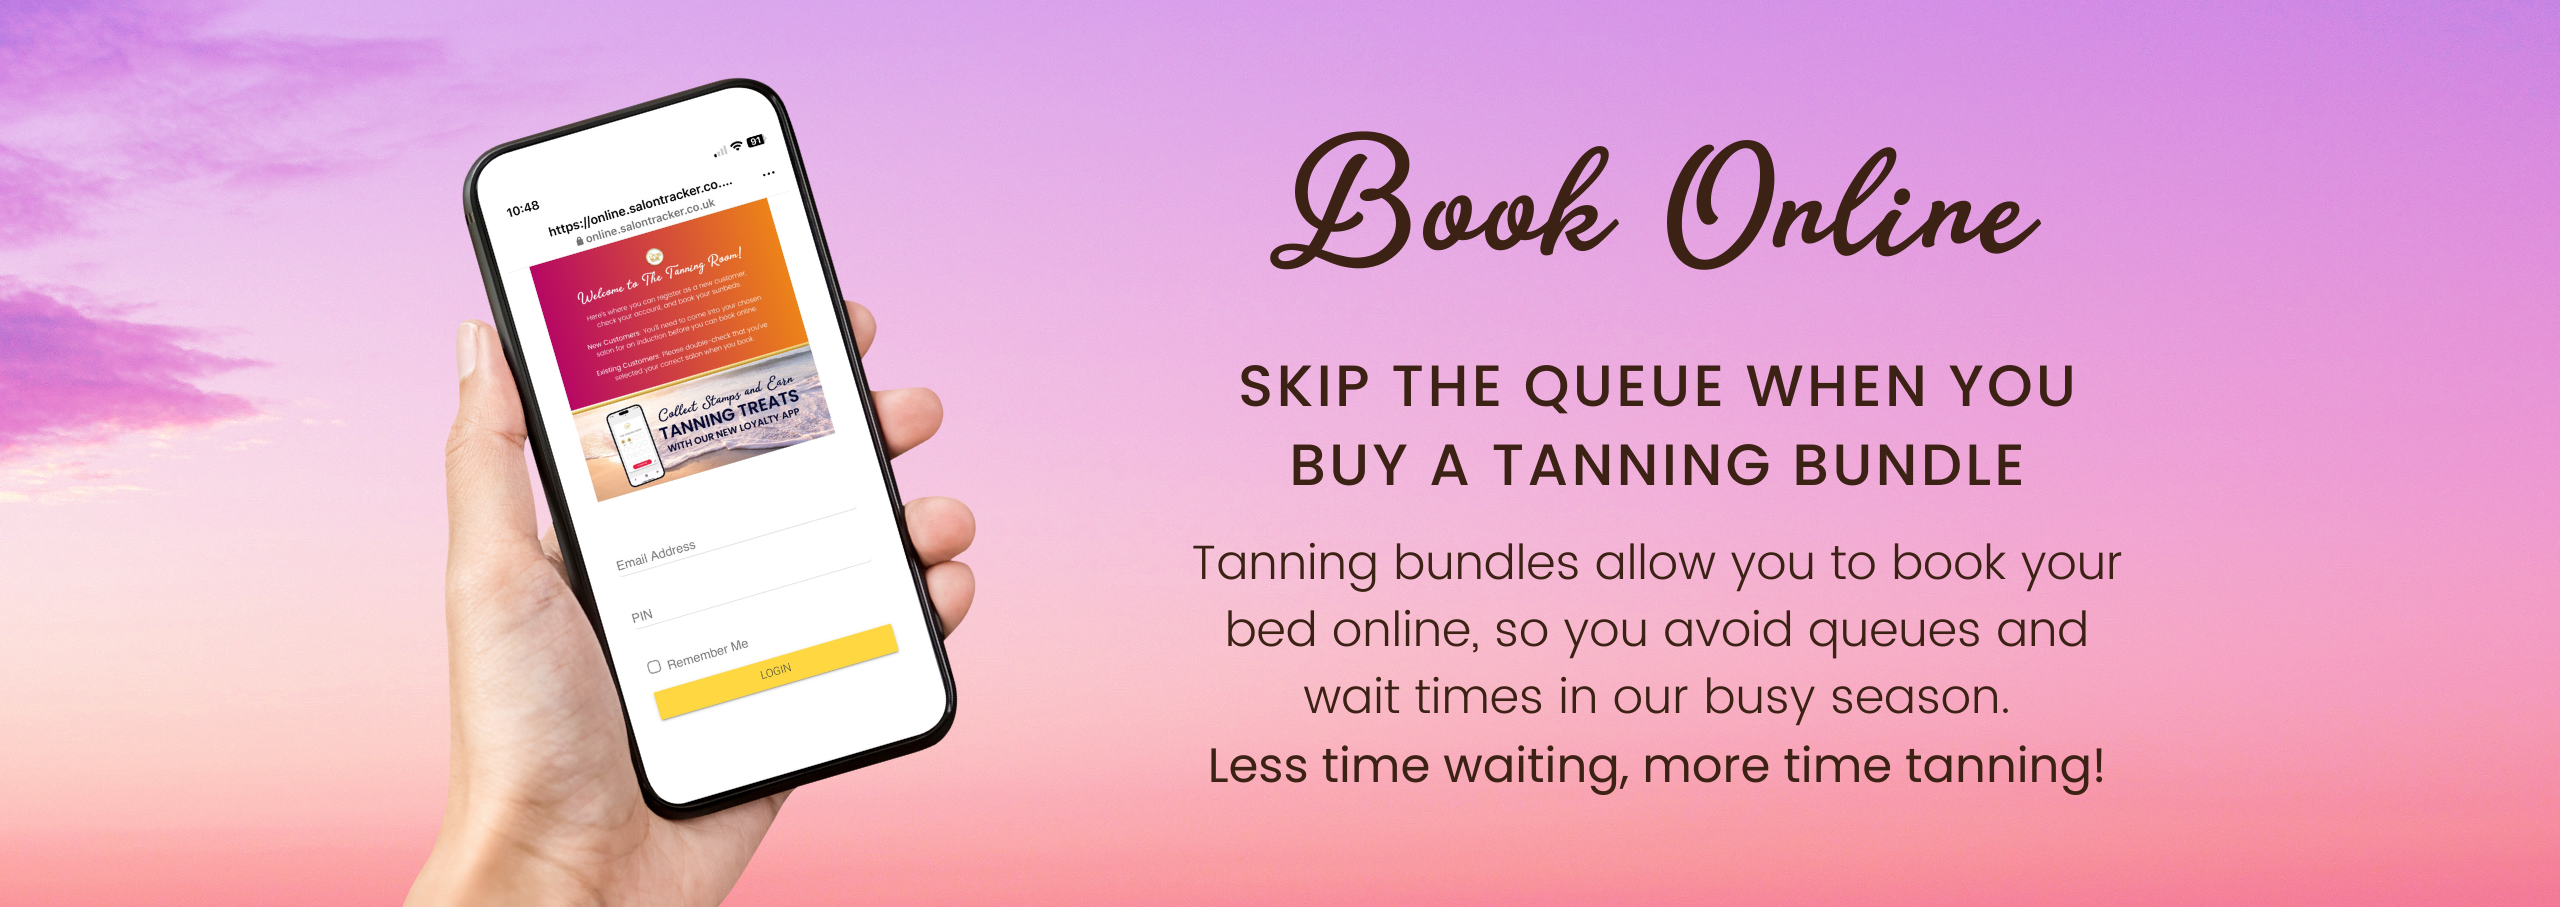 Skip the queue when you buy a tanning bundle and book your bed online